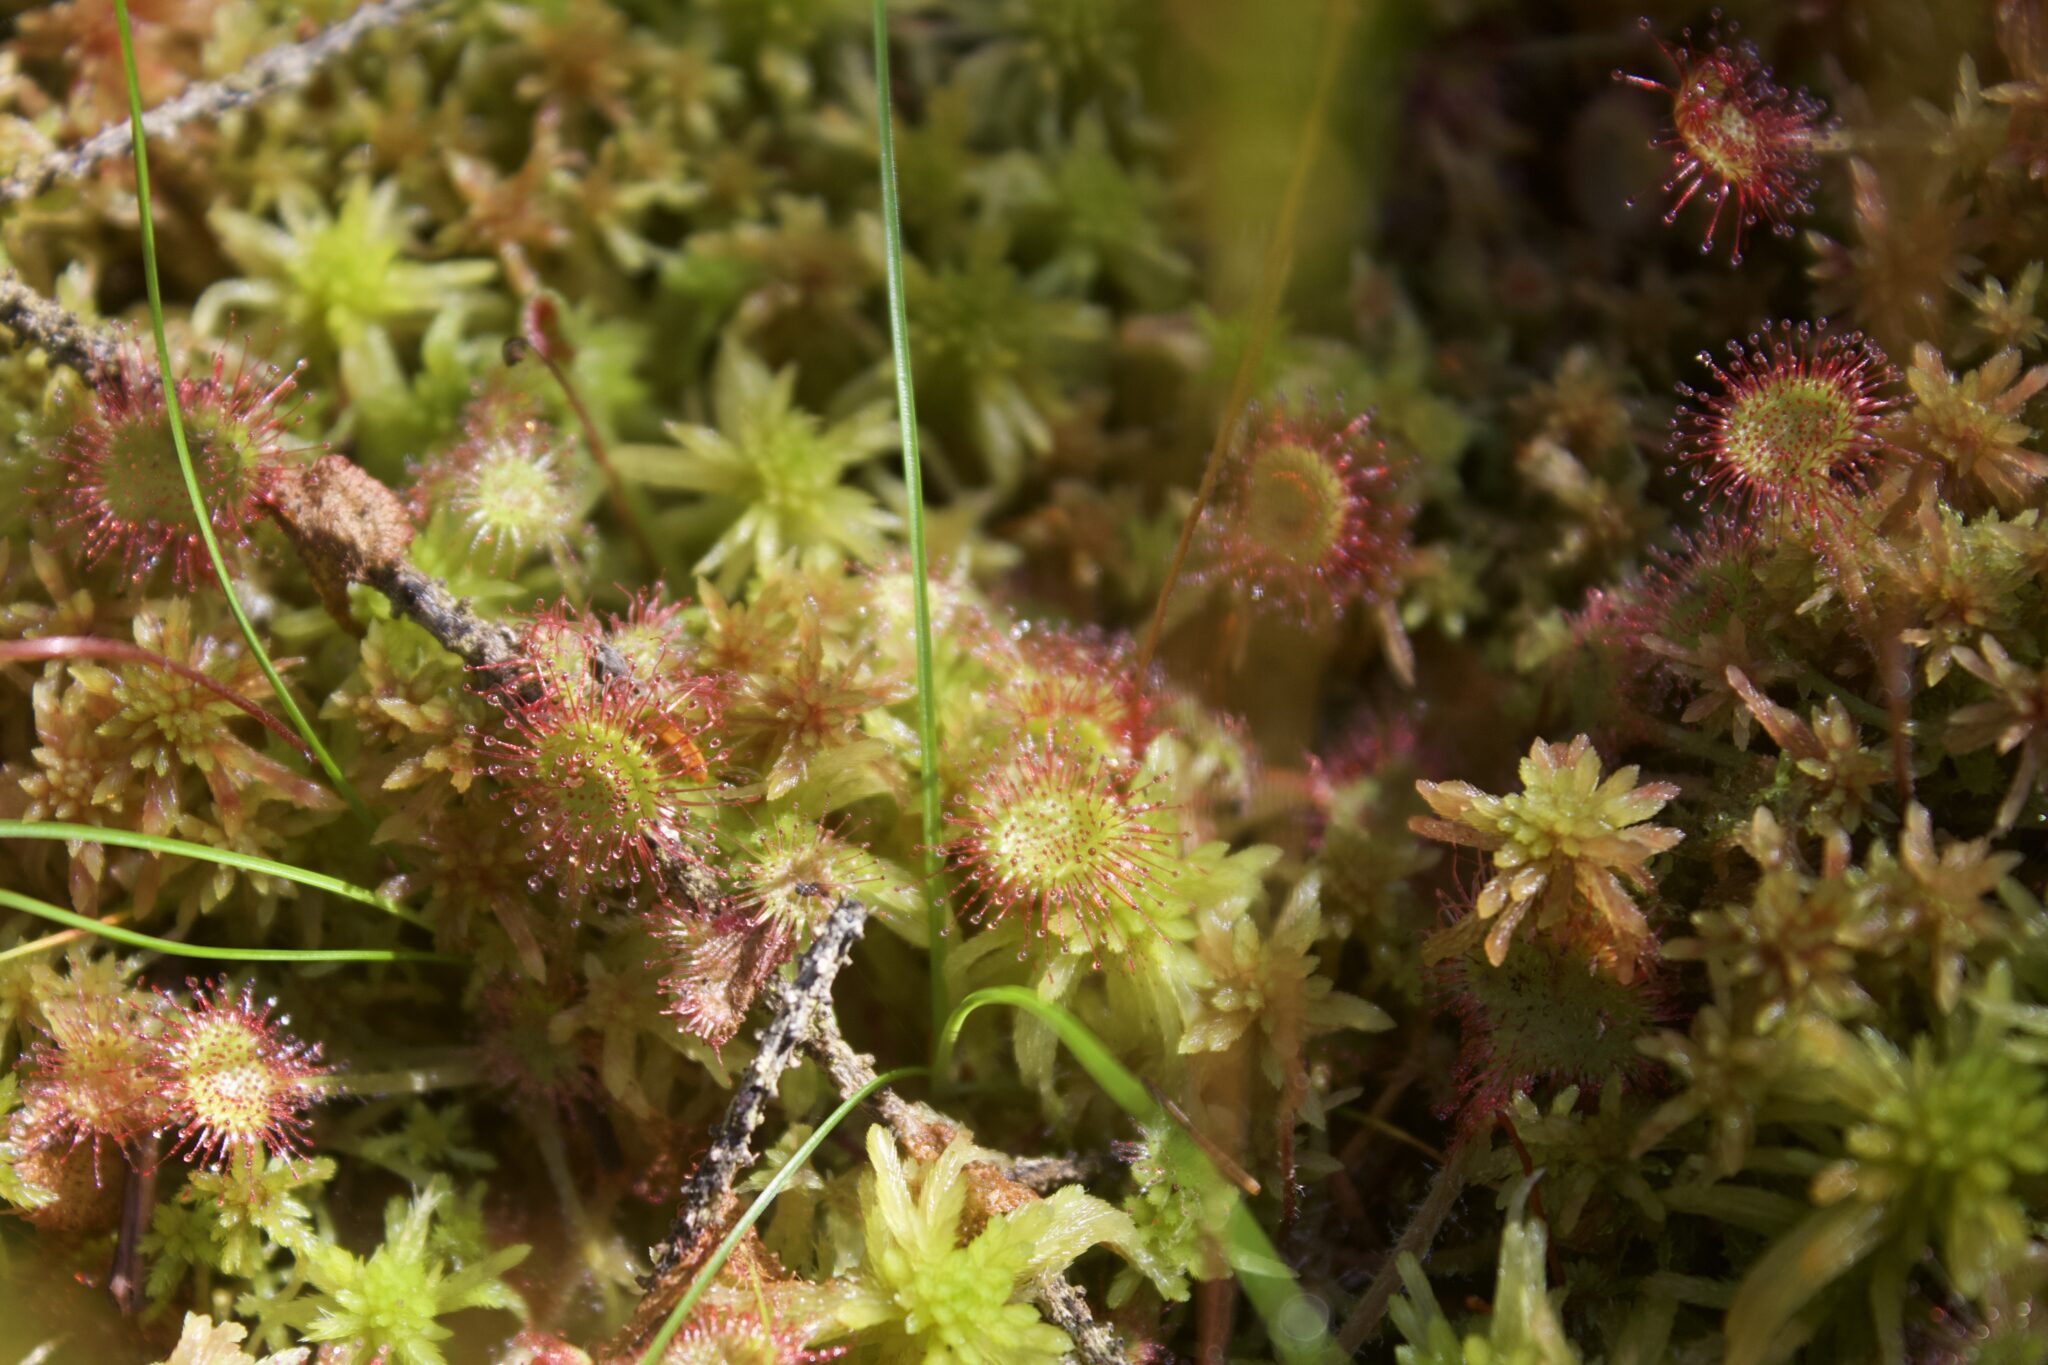 Sunlight shines on several sundew leaves and moss.